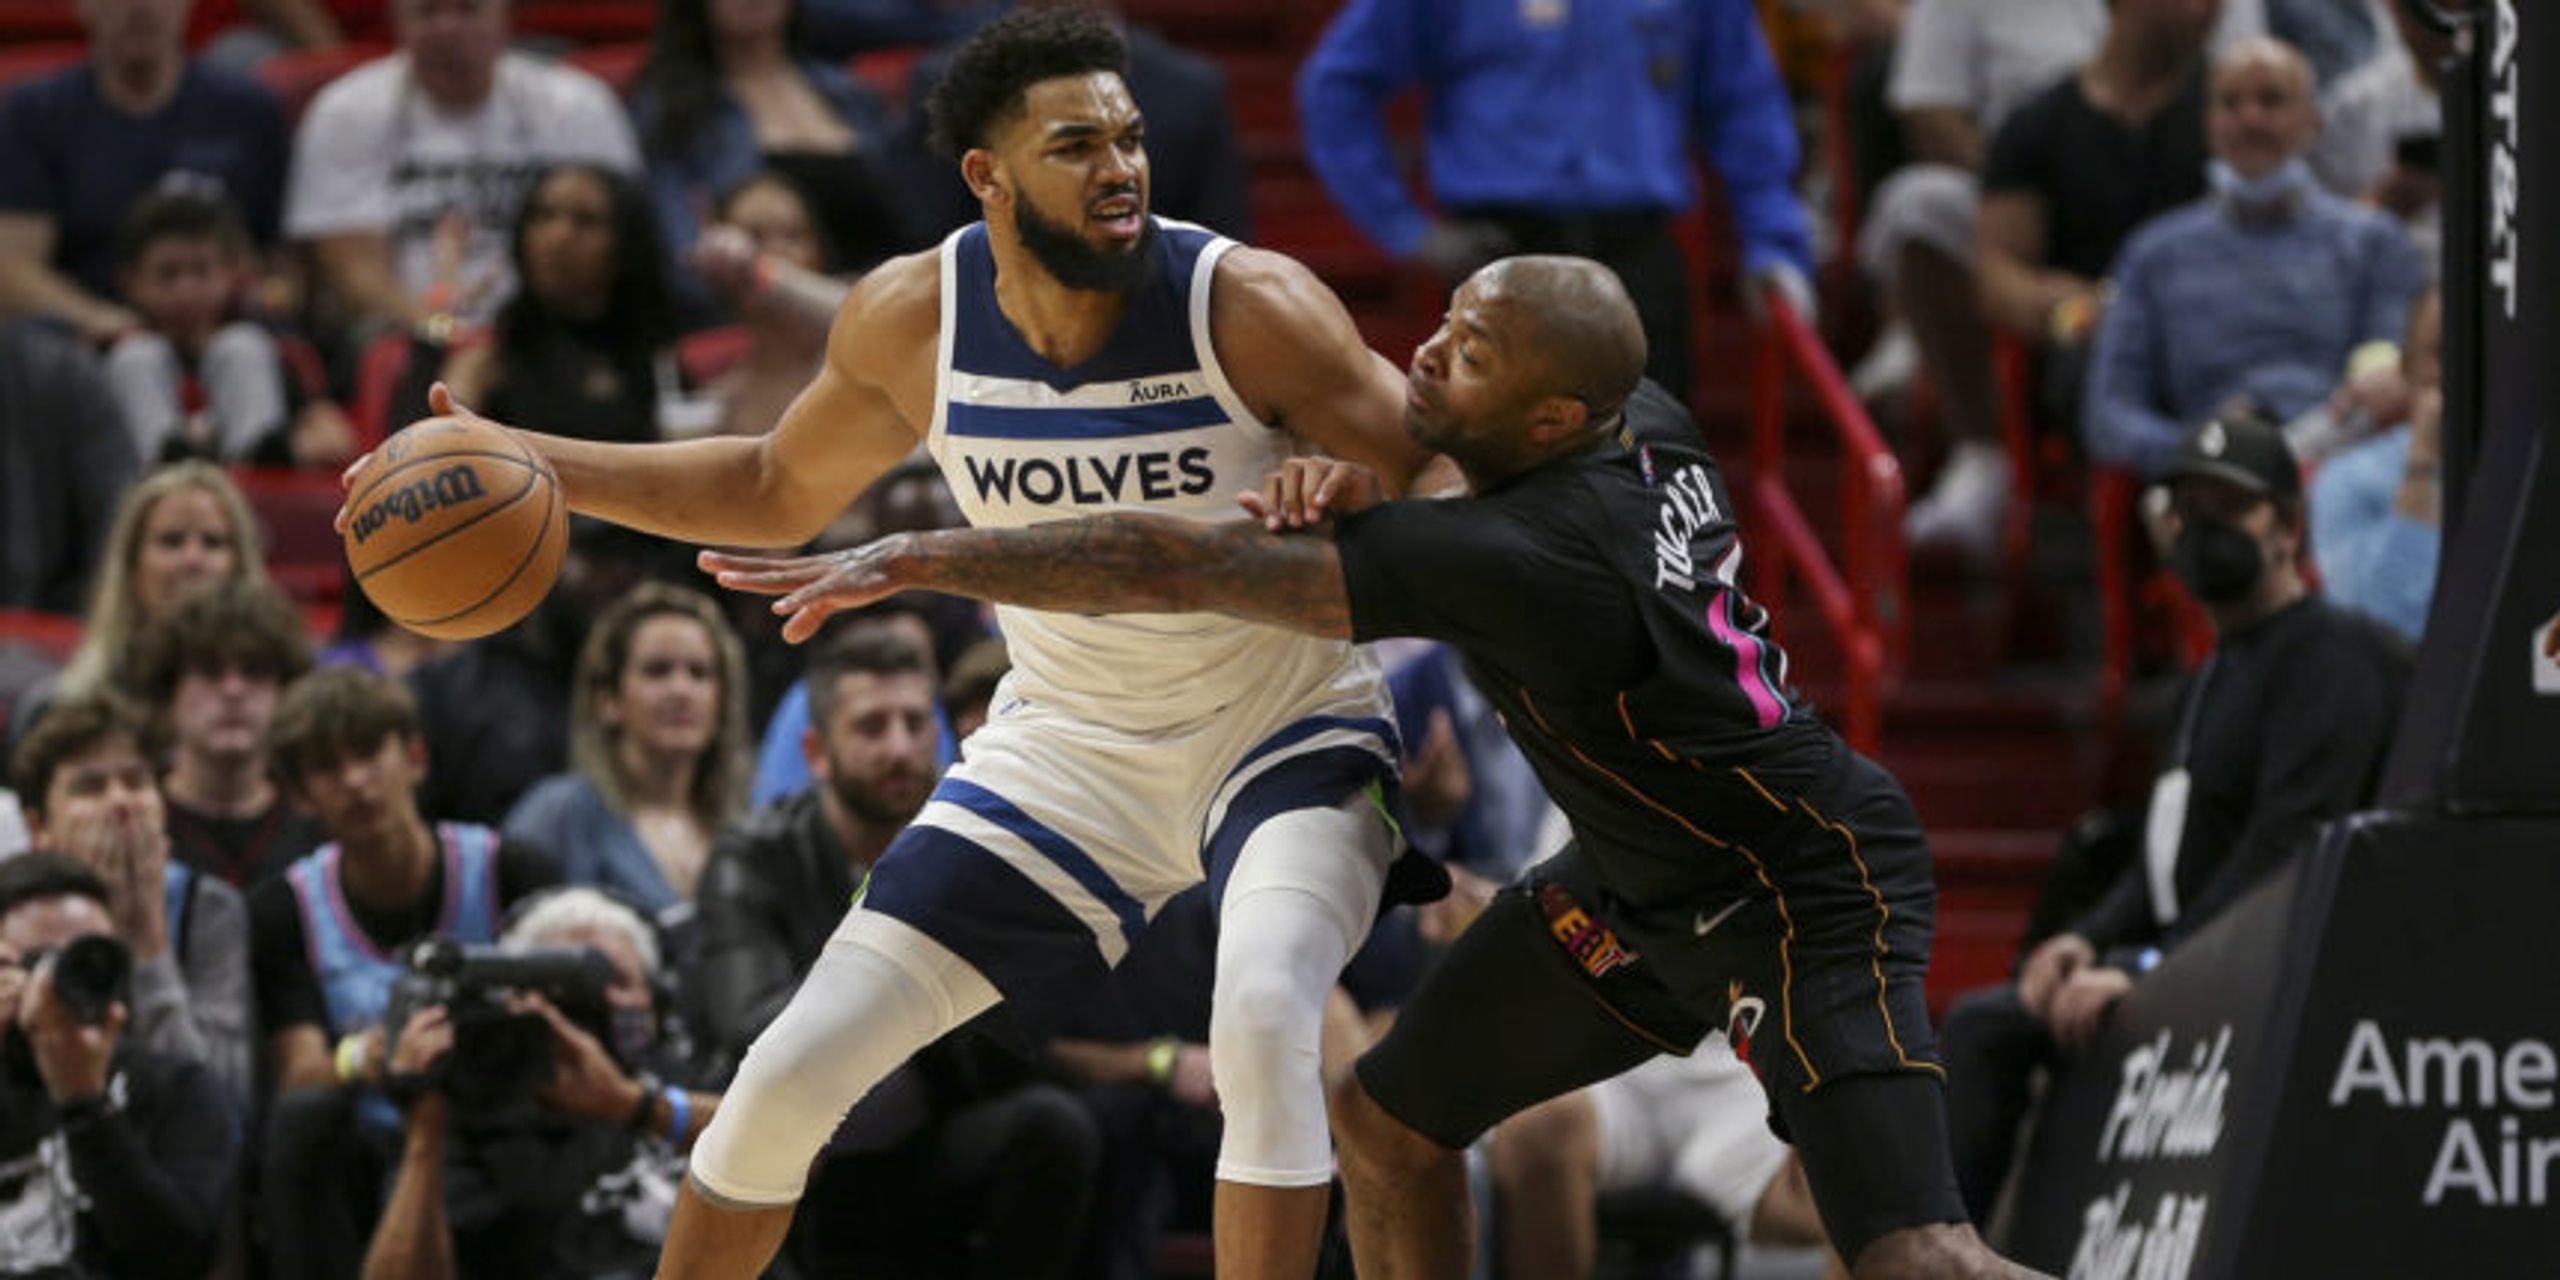 Timberwolves beat Heat 113-104 for 7th win in 8 games